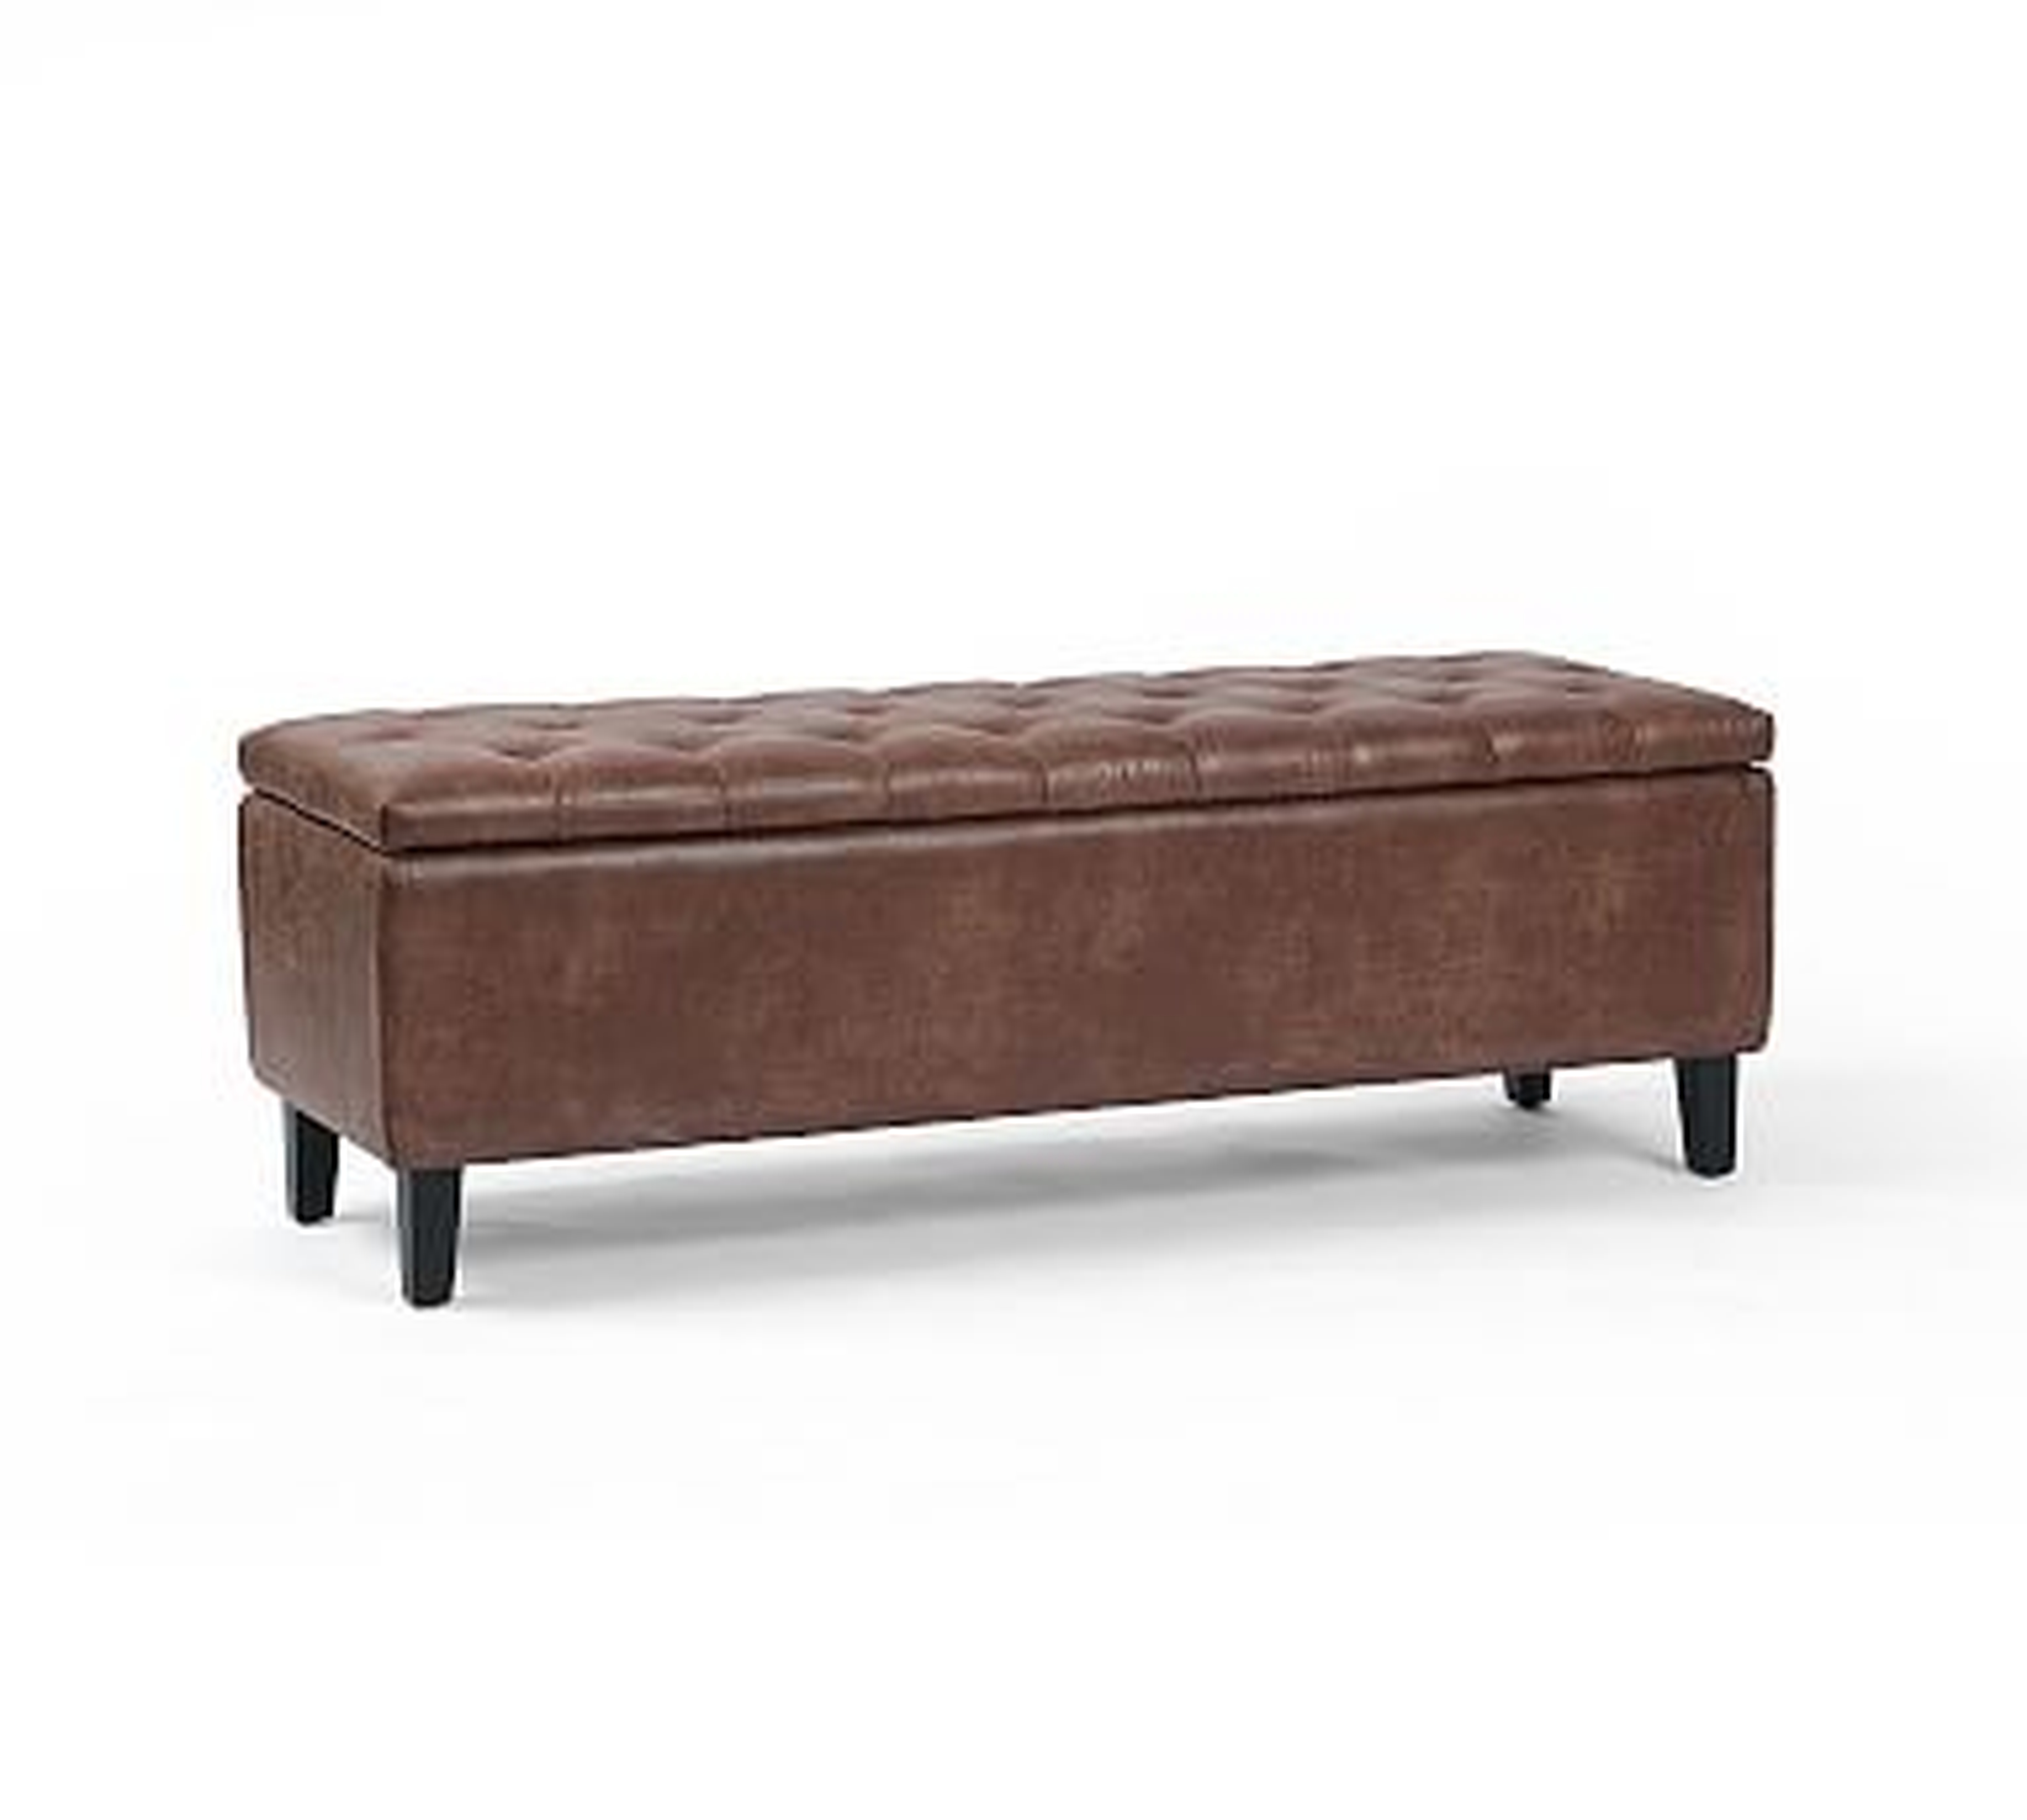 Jay Tufted Leather Storage Bench, Tobacco - Pottery Barn